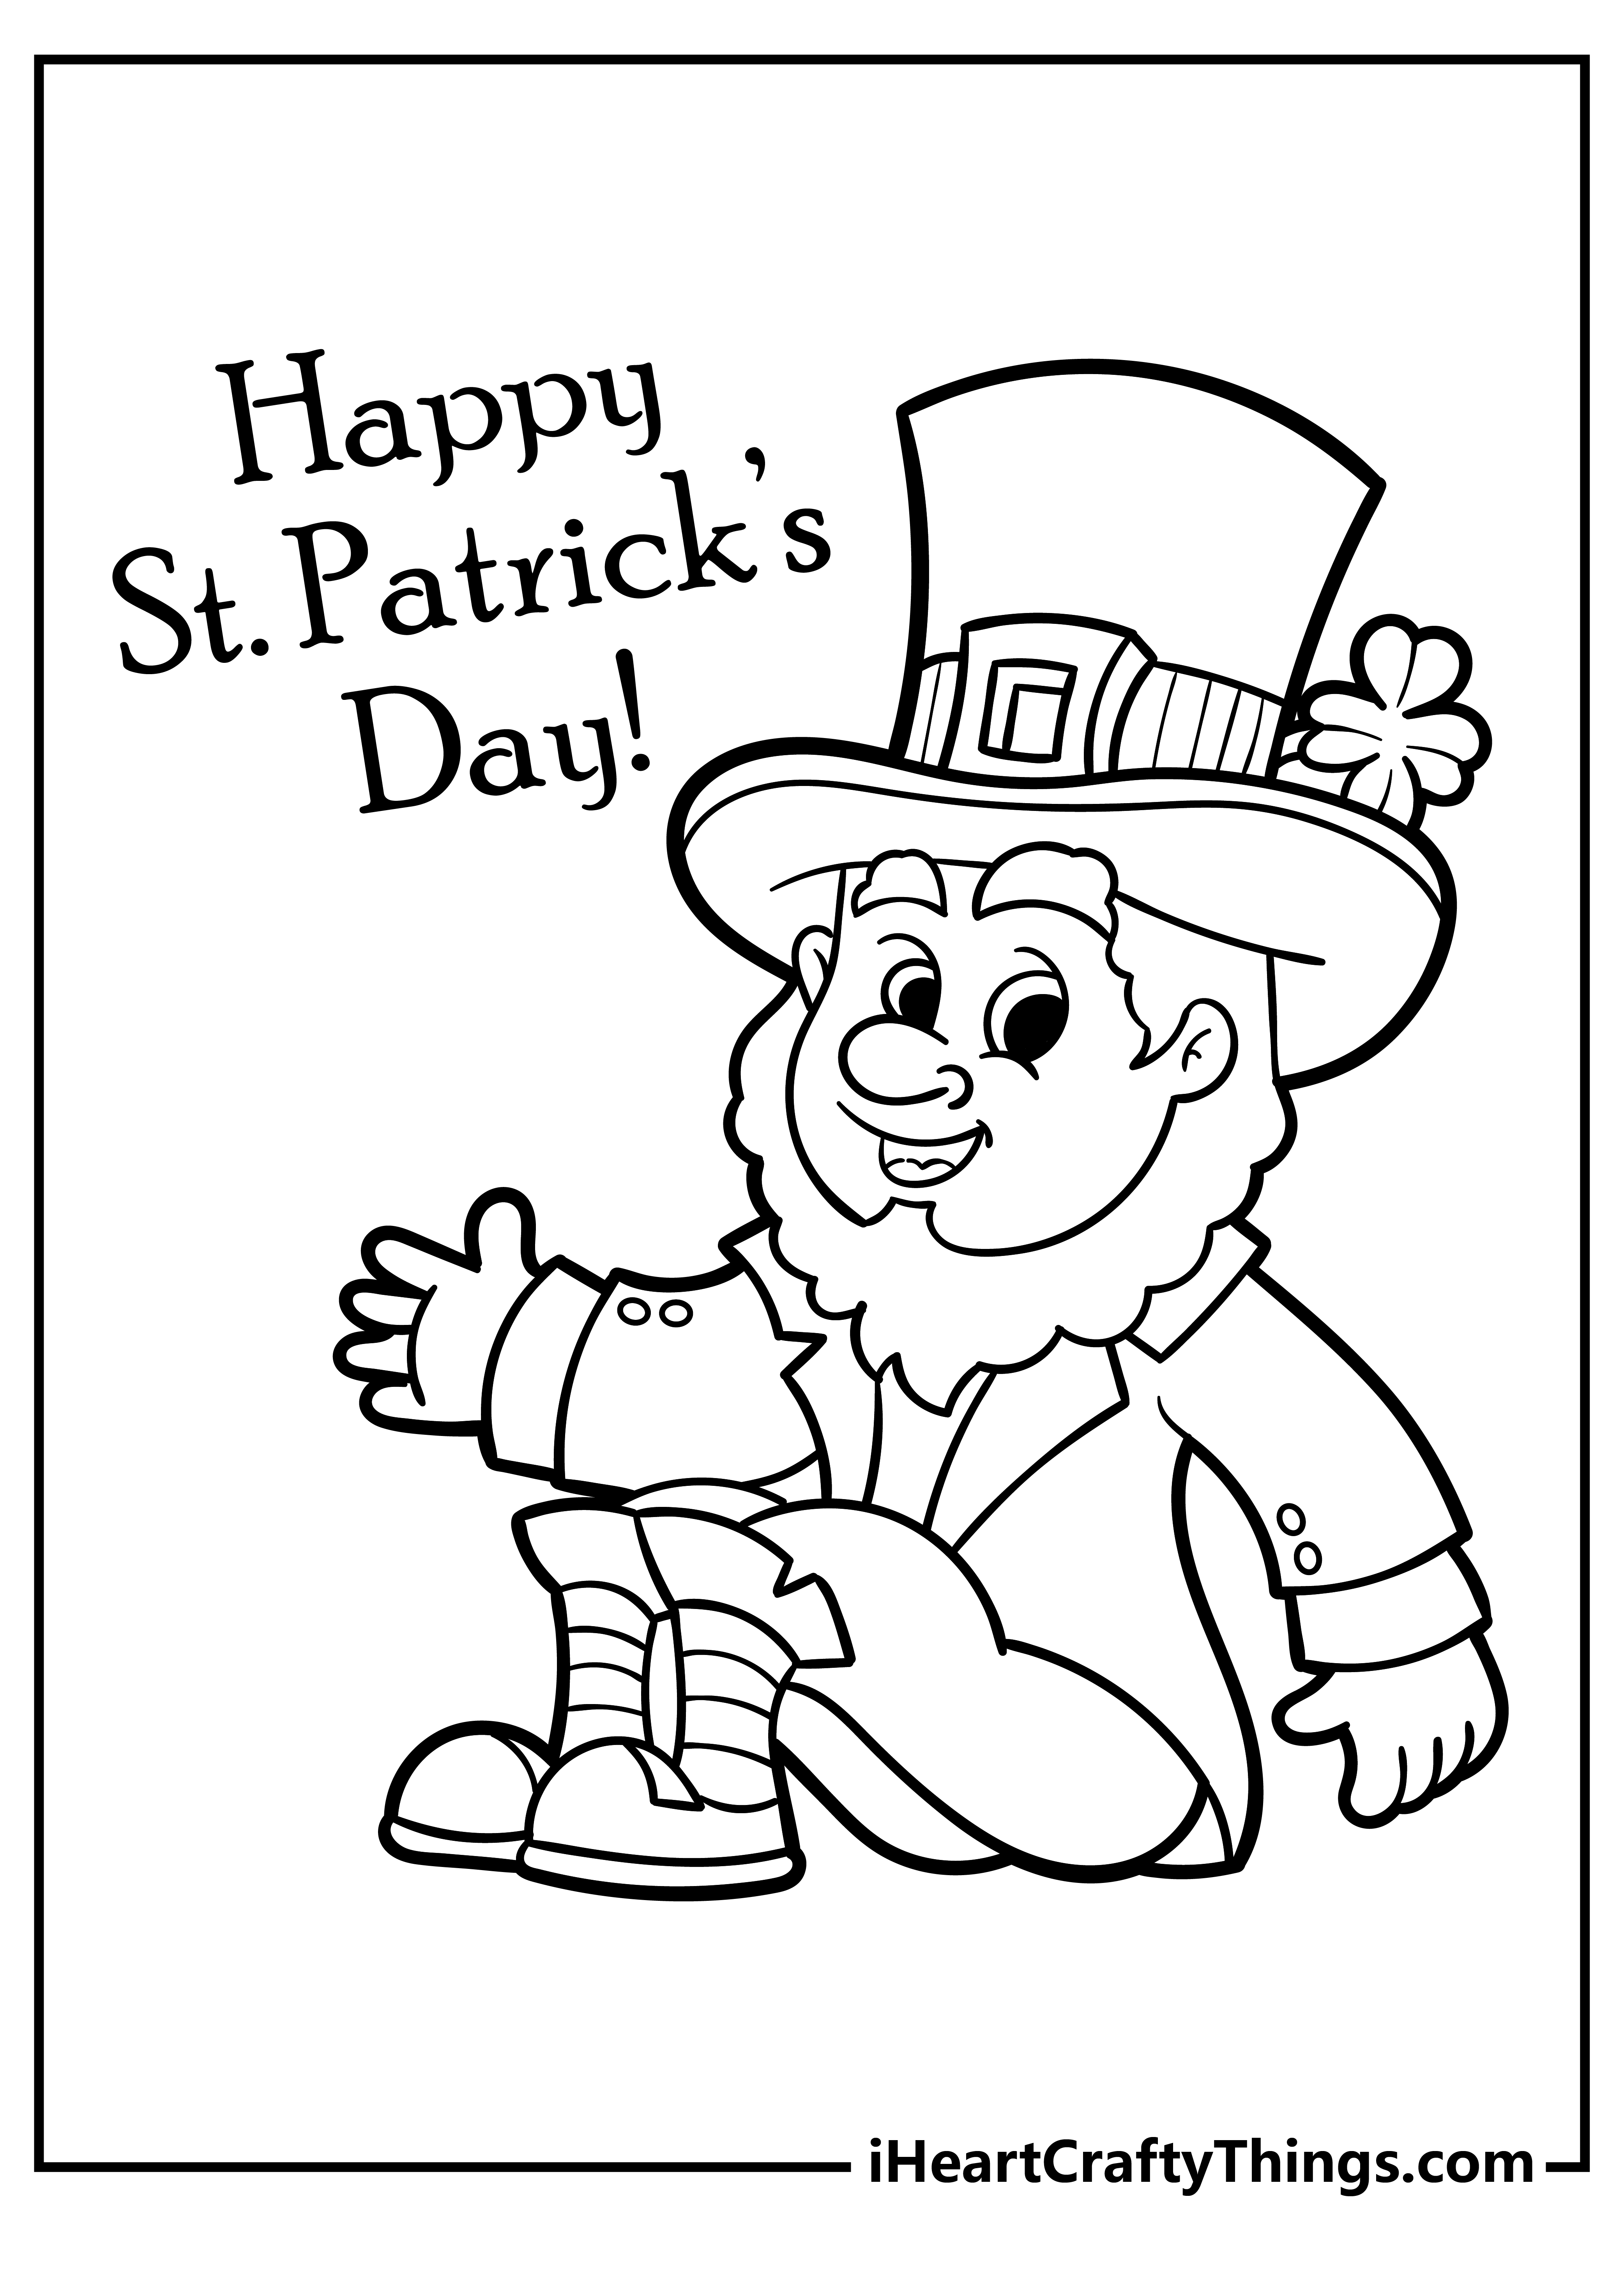 St Patrick’s Day Coloring Pages free pdf download